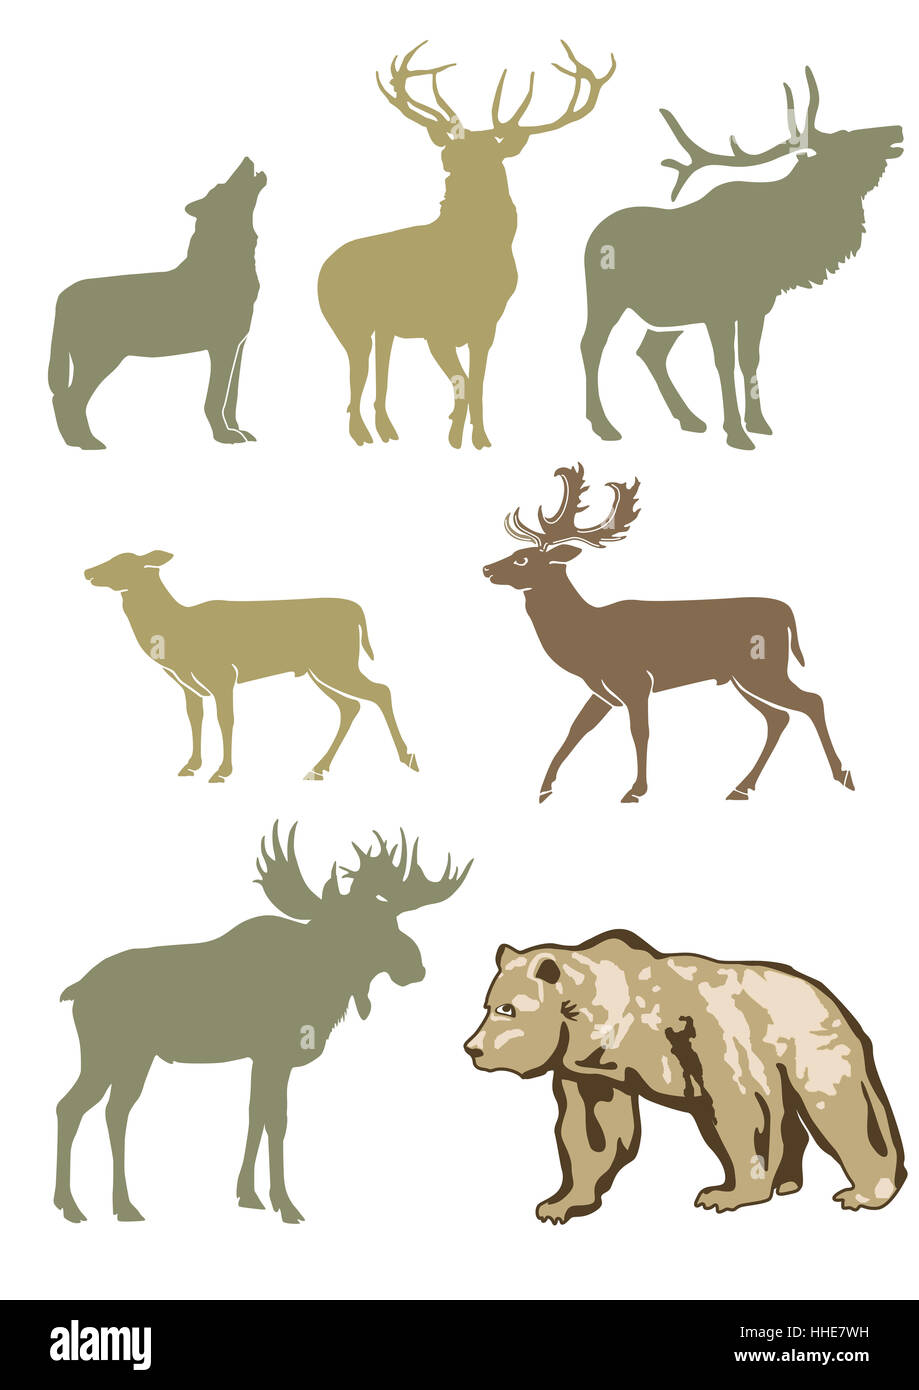 forest animals Stock Photo